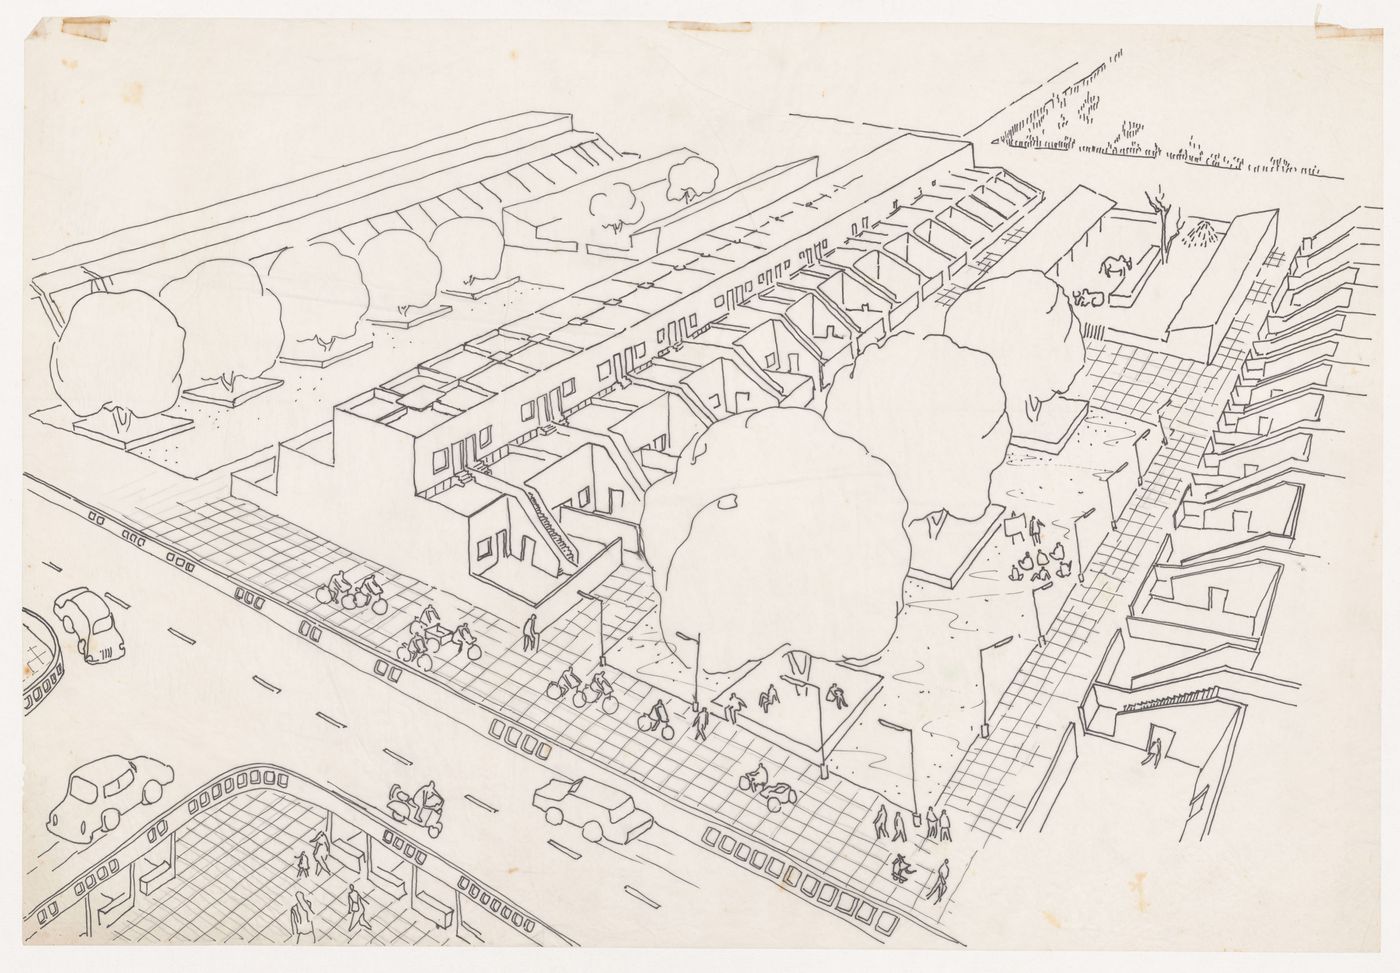 Sketch perspective of housing for Linear City, Chandigarh, India